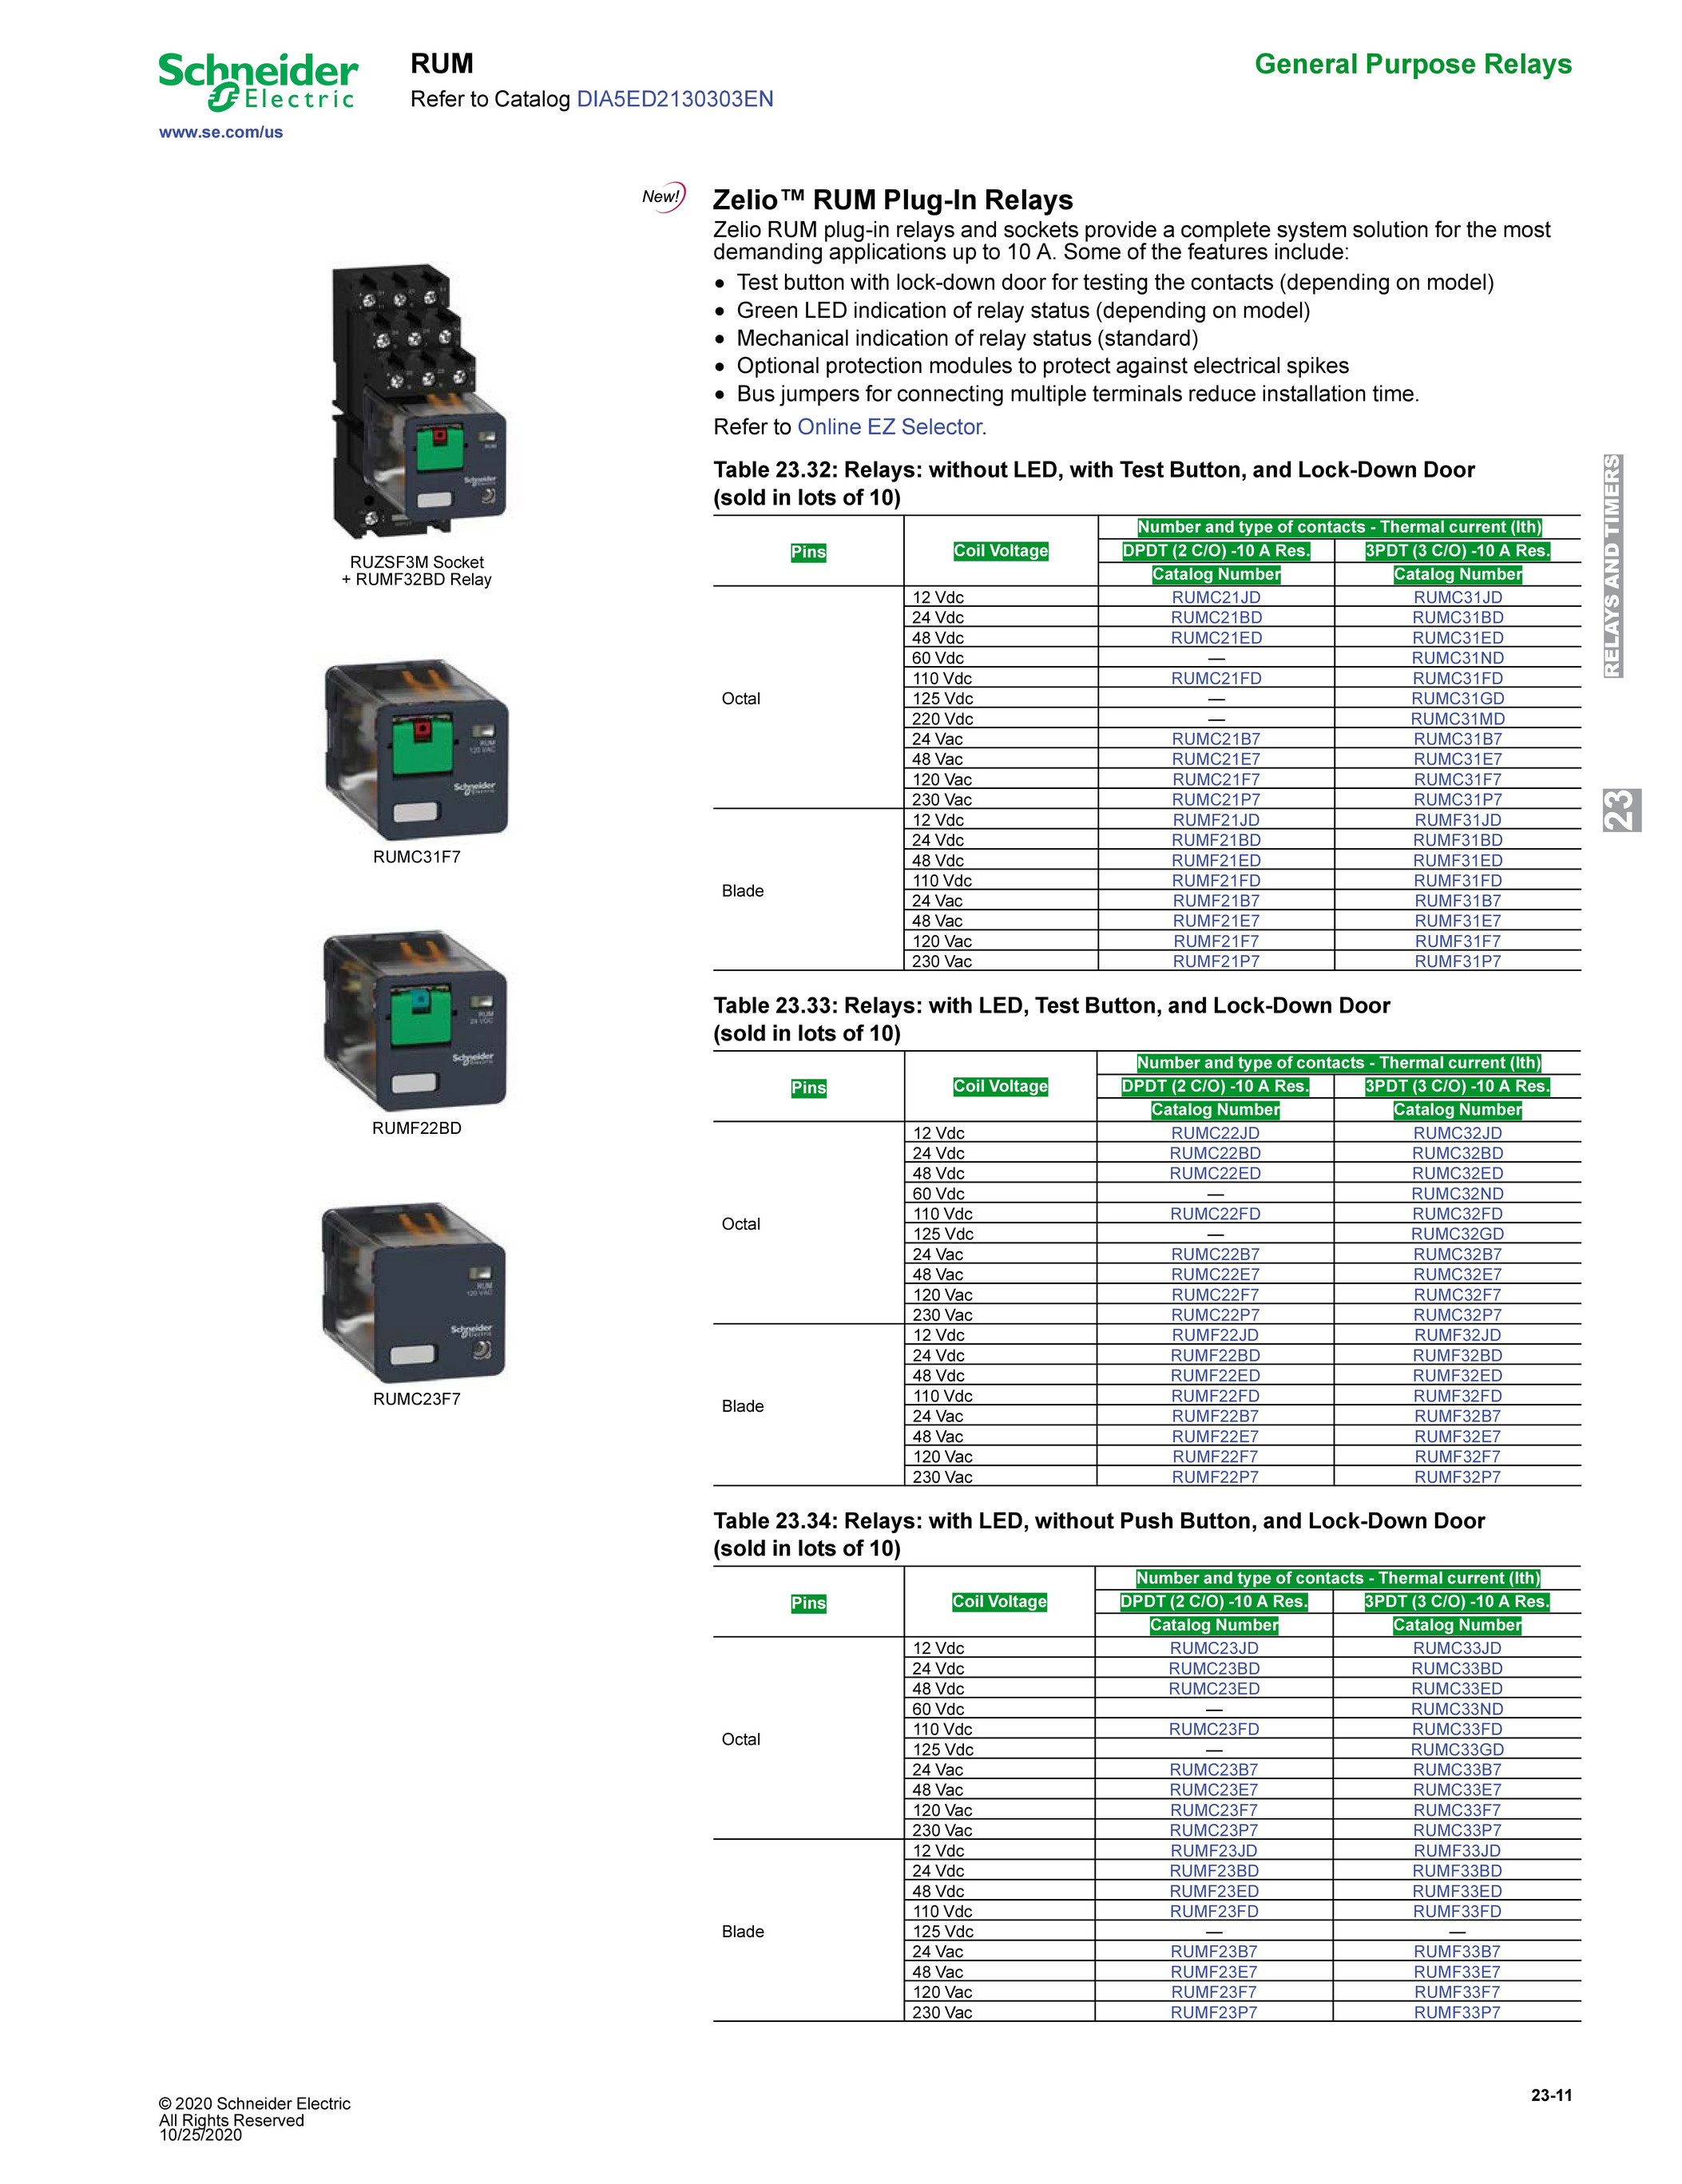 Motion - Schneider Zelio Relays and Timers - Page 4-5